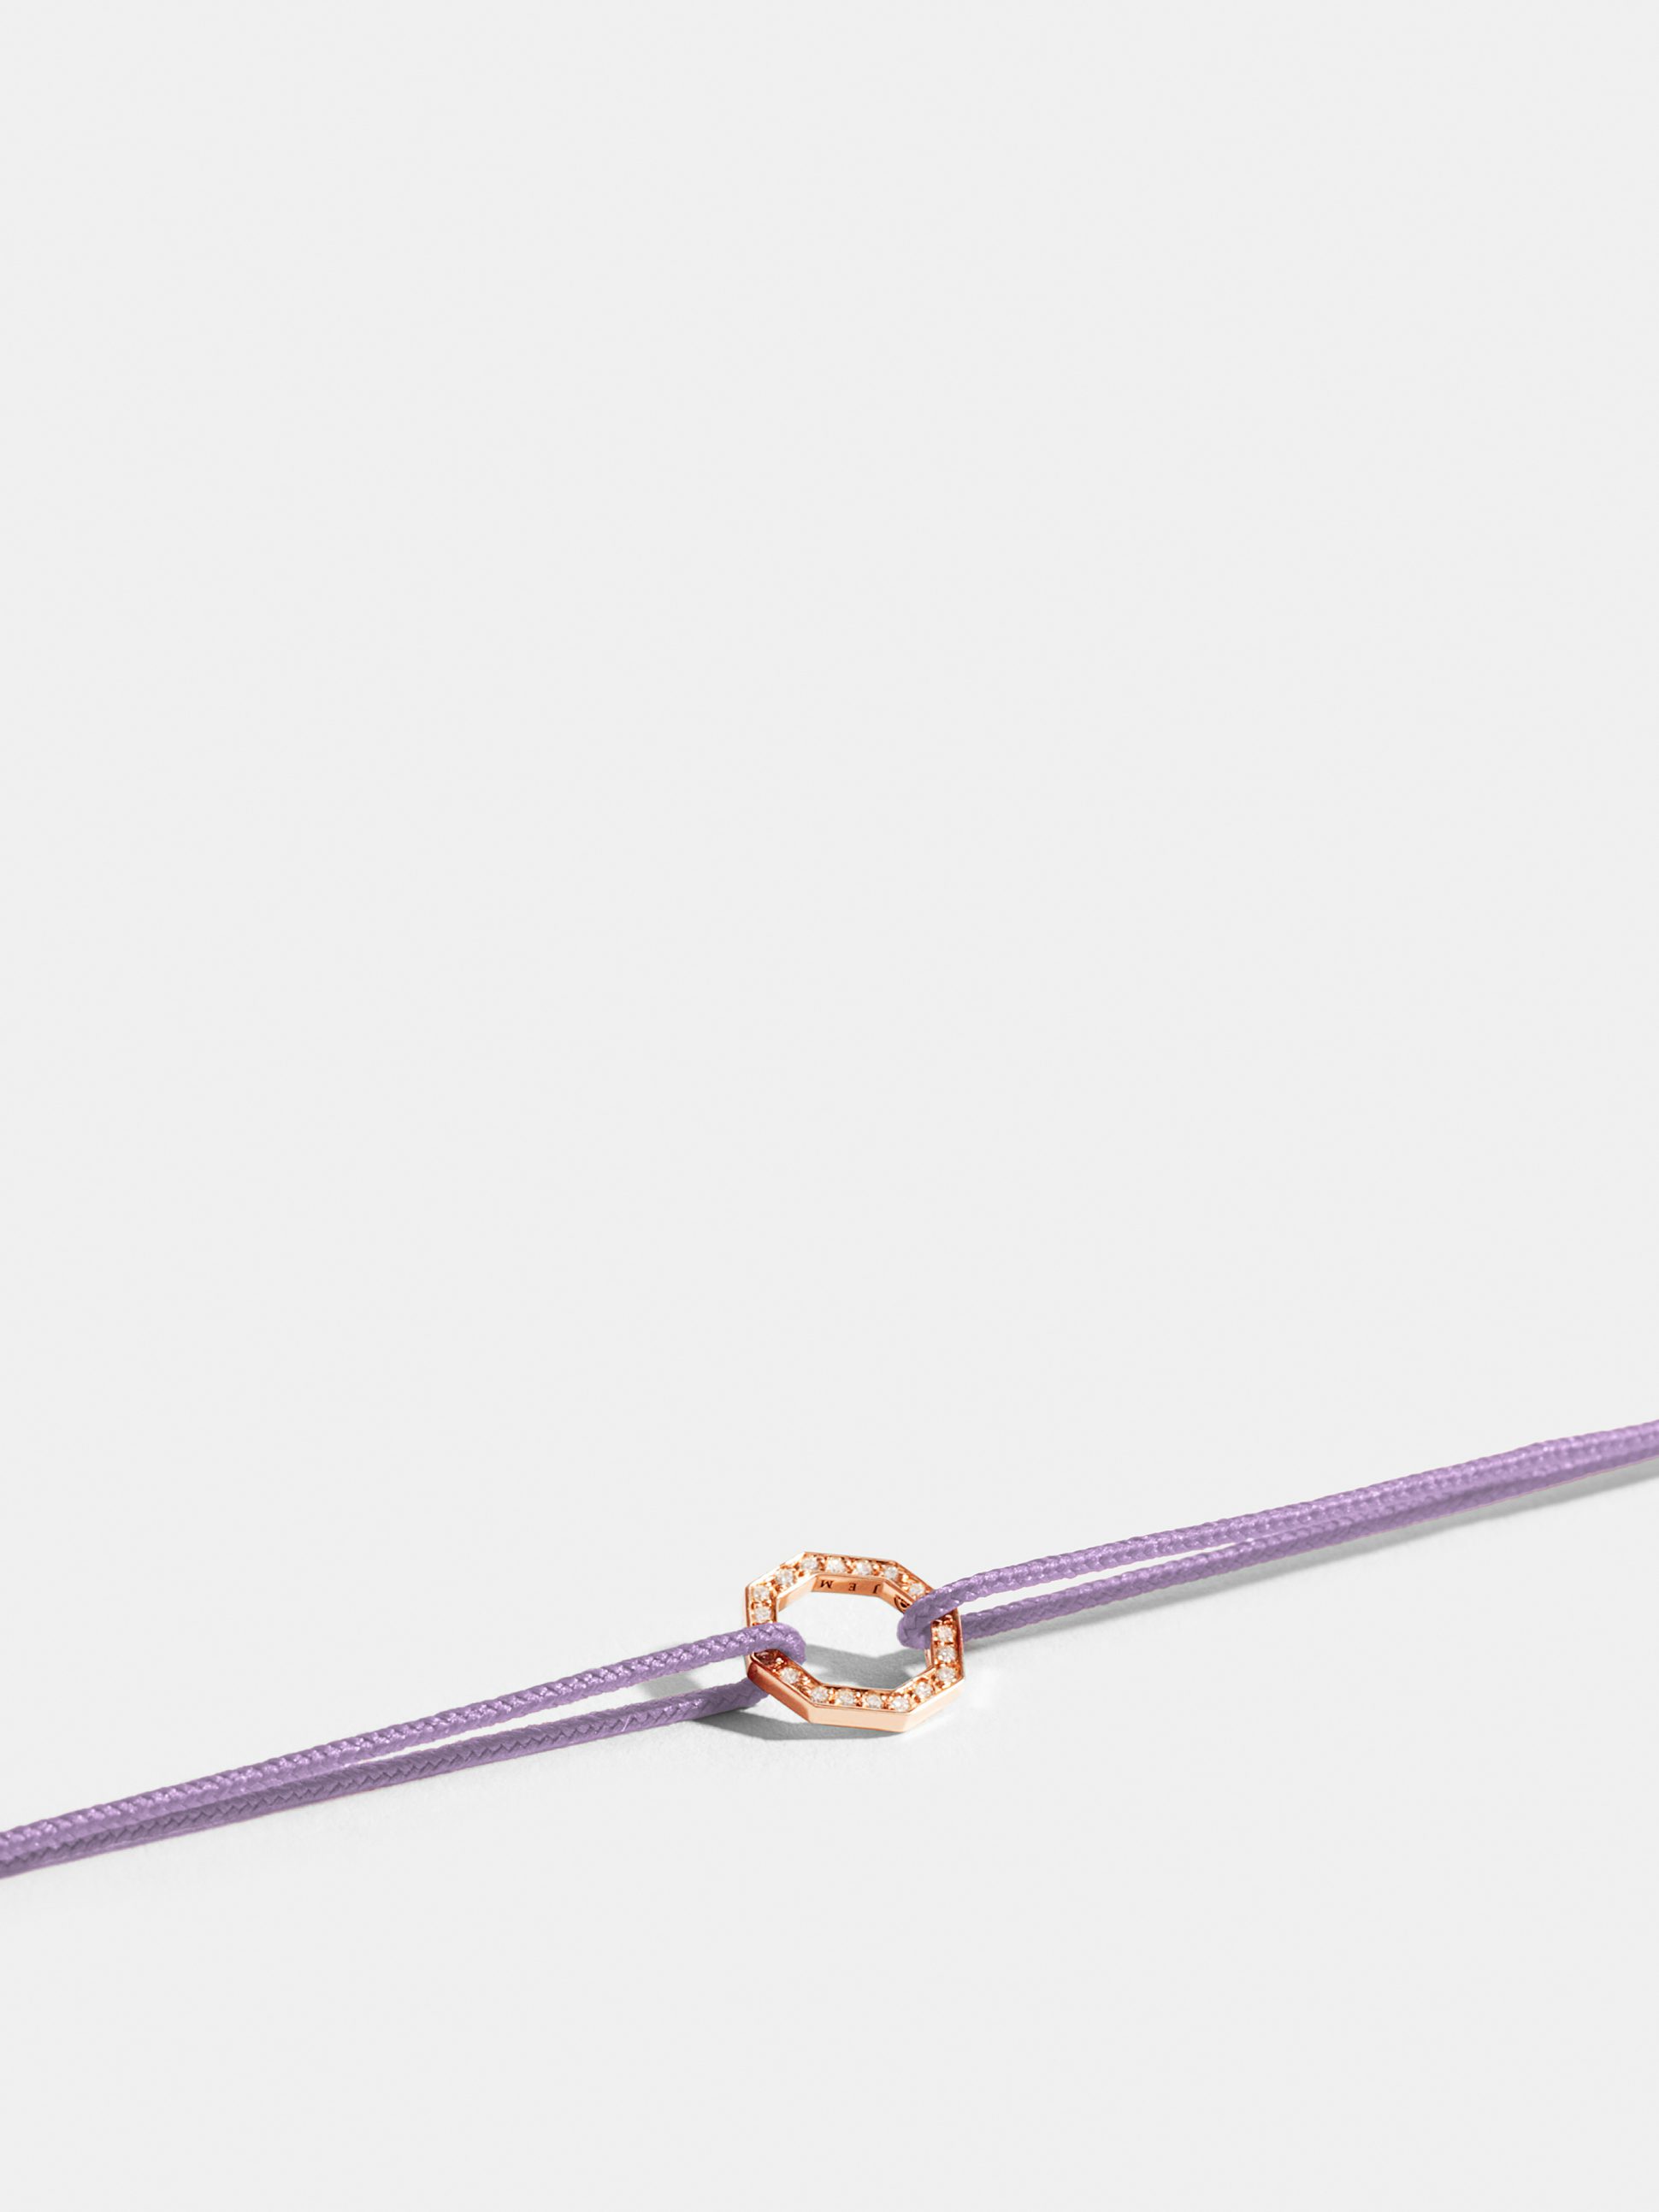 Octogone motif in 18k Fairmined ethical rose gold, paved with lab-grown diamonds, on a lilac purple cord.